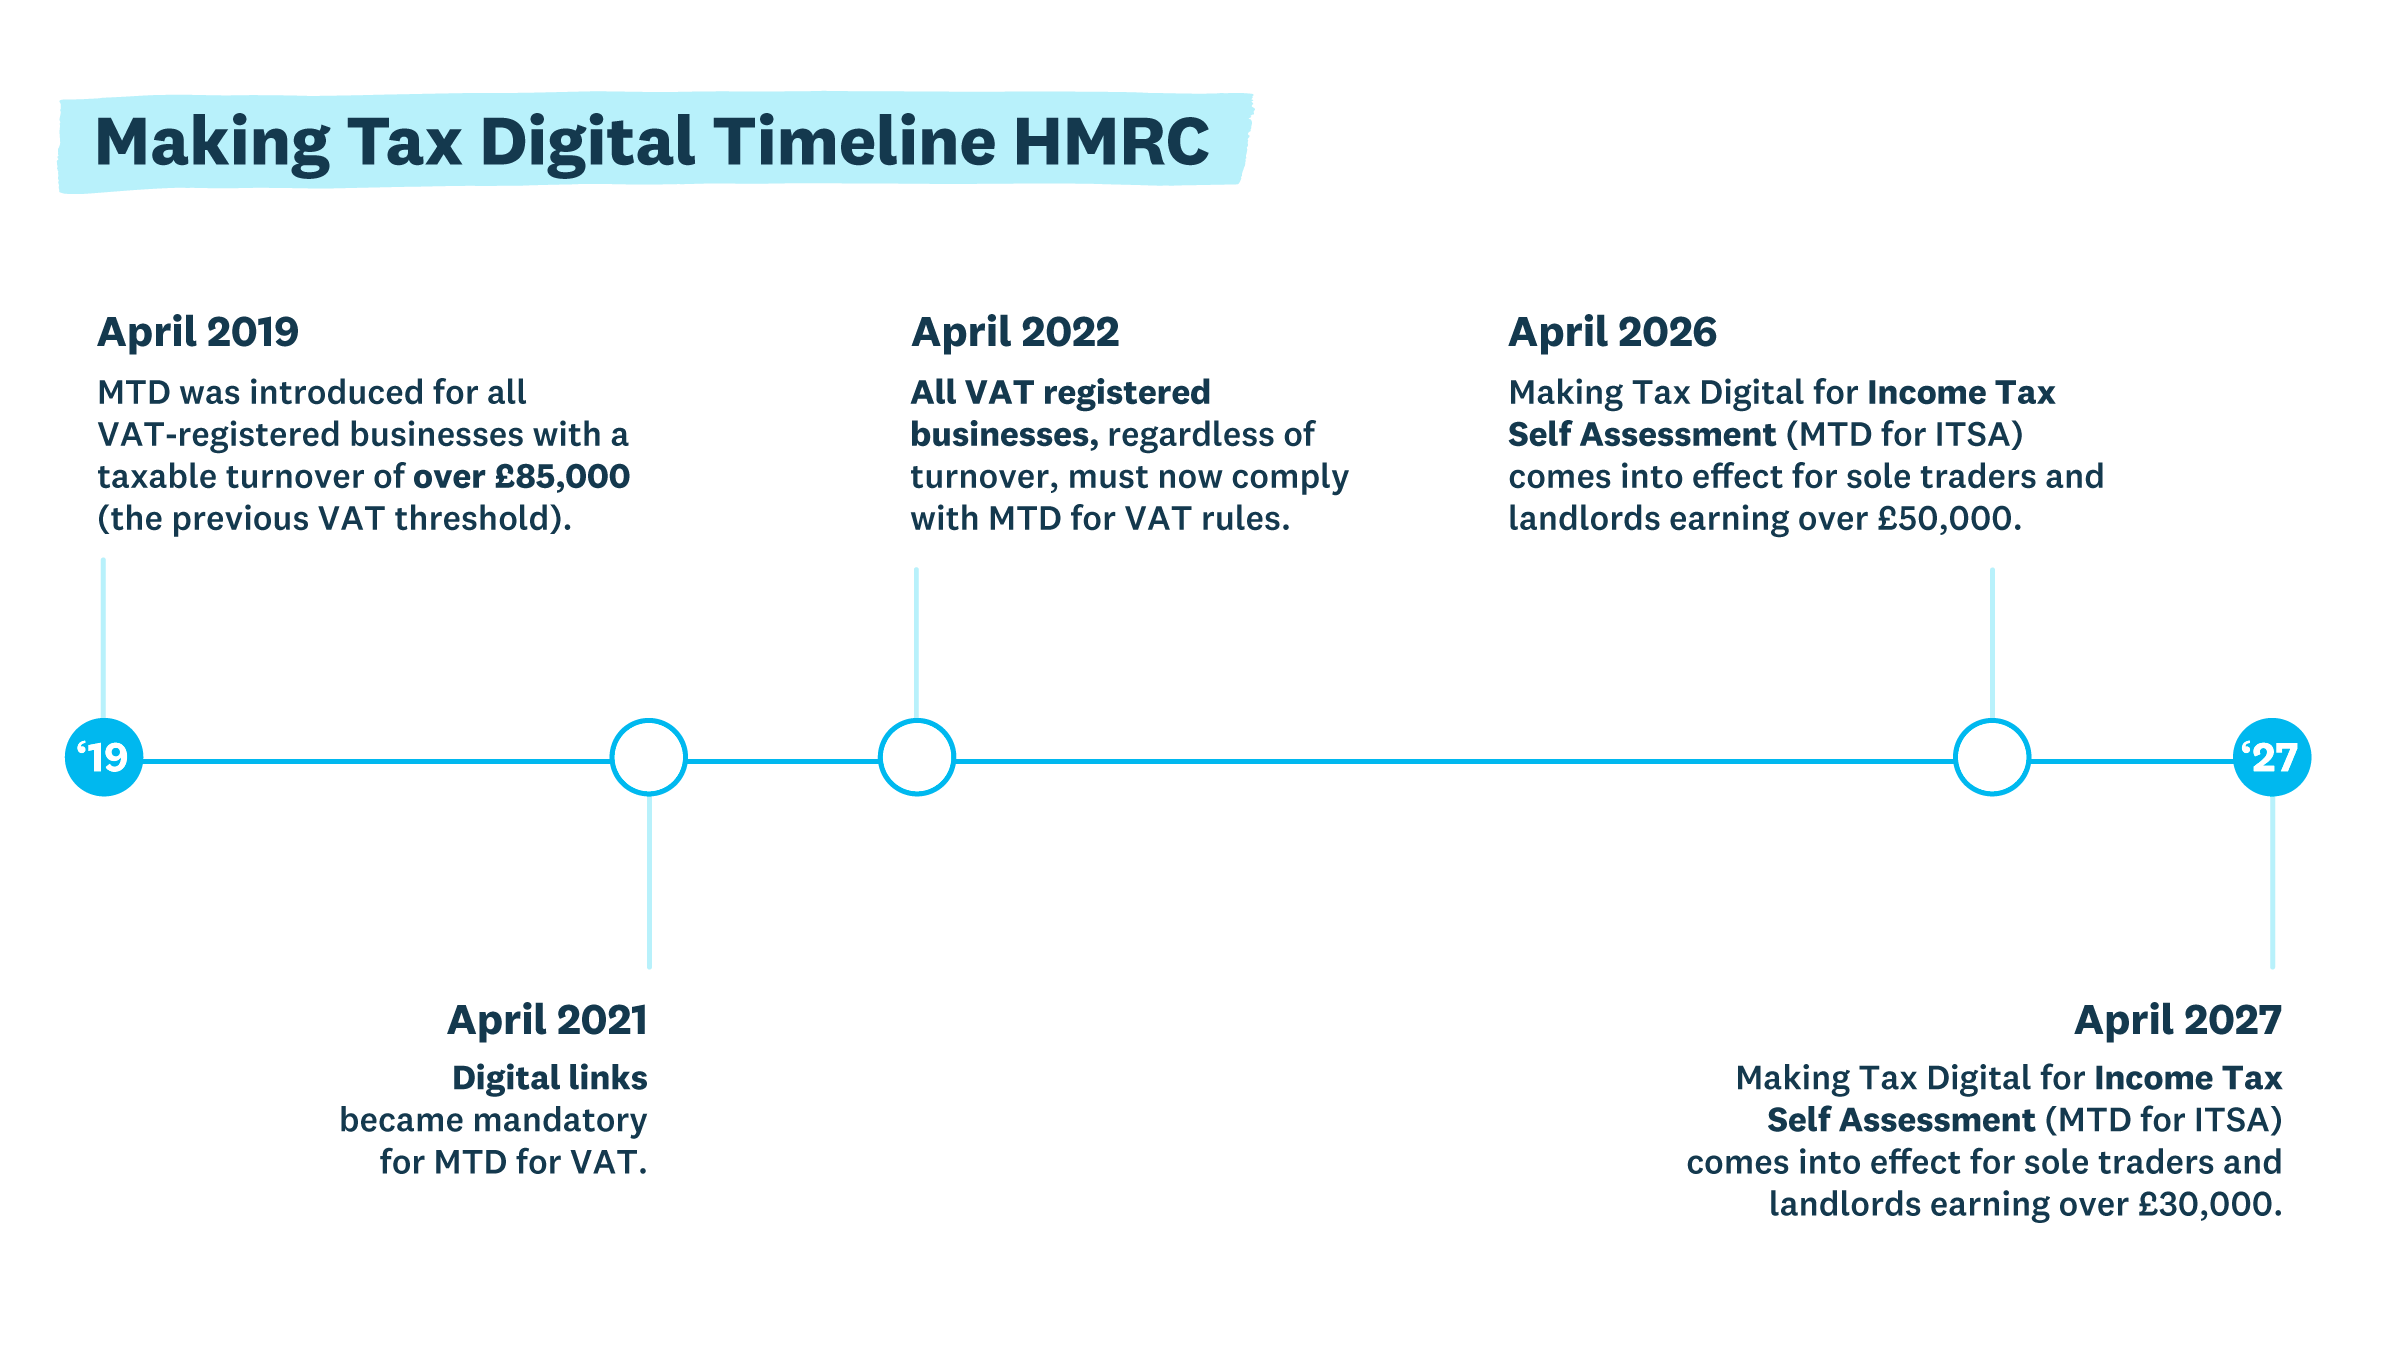 HMRC’s timeline of important dates for Making Tax Digital